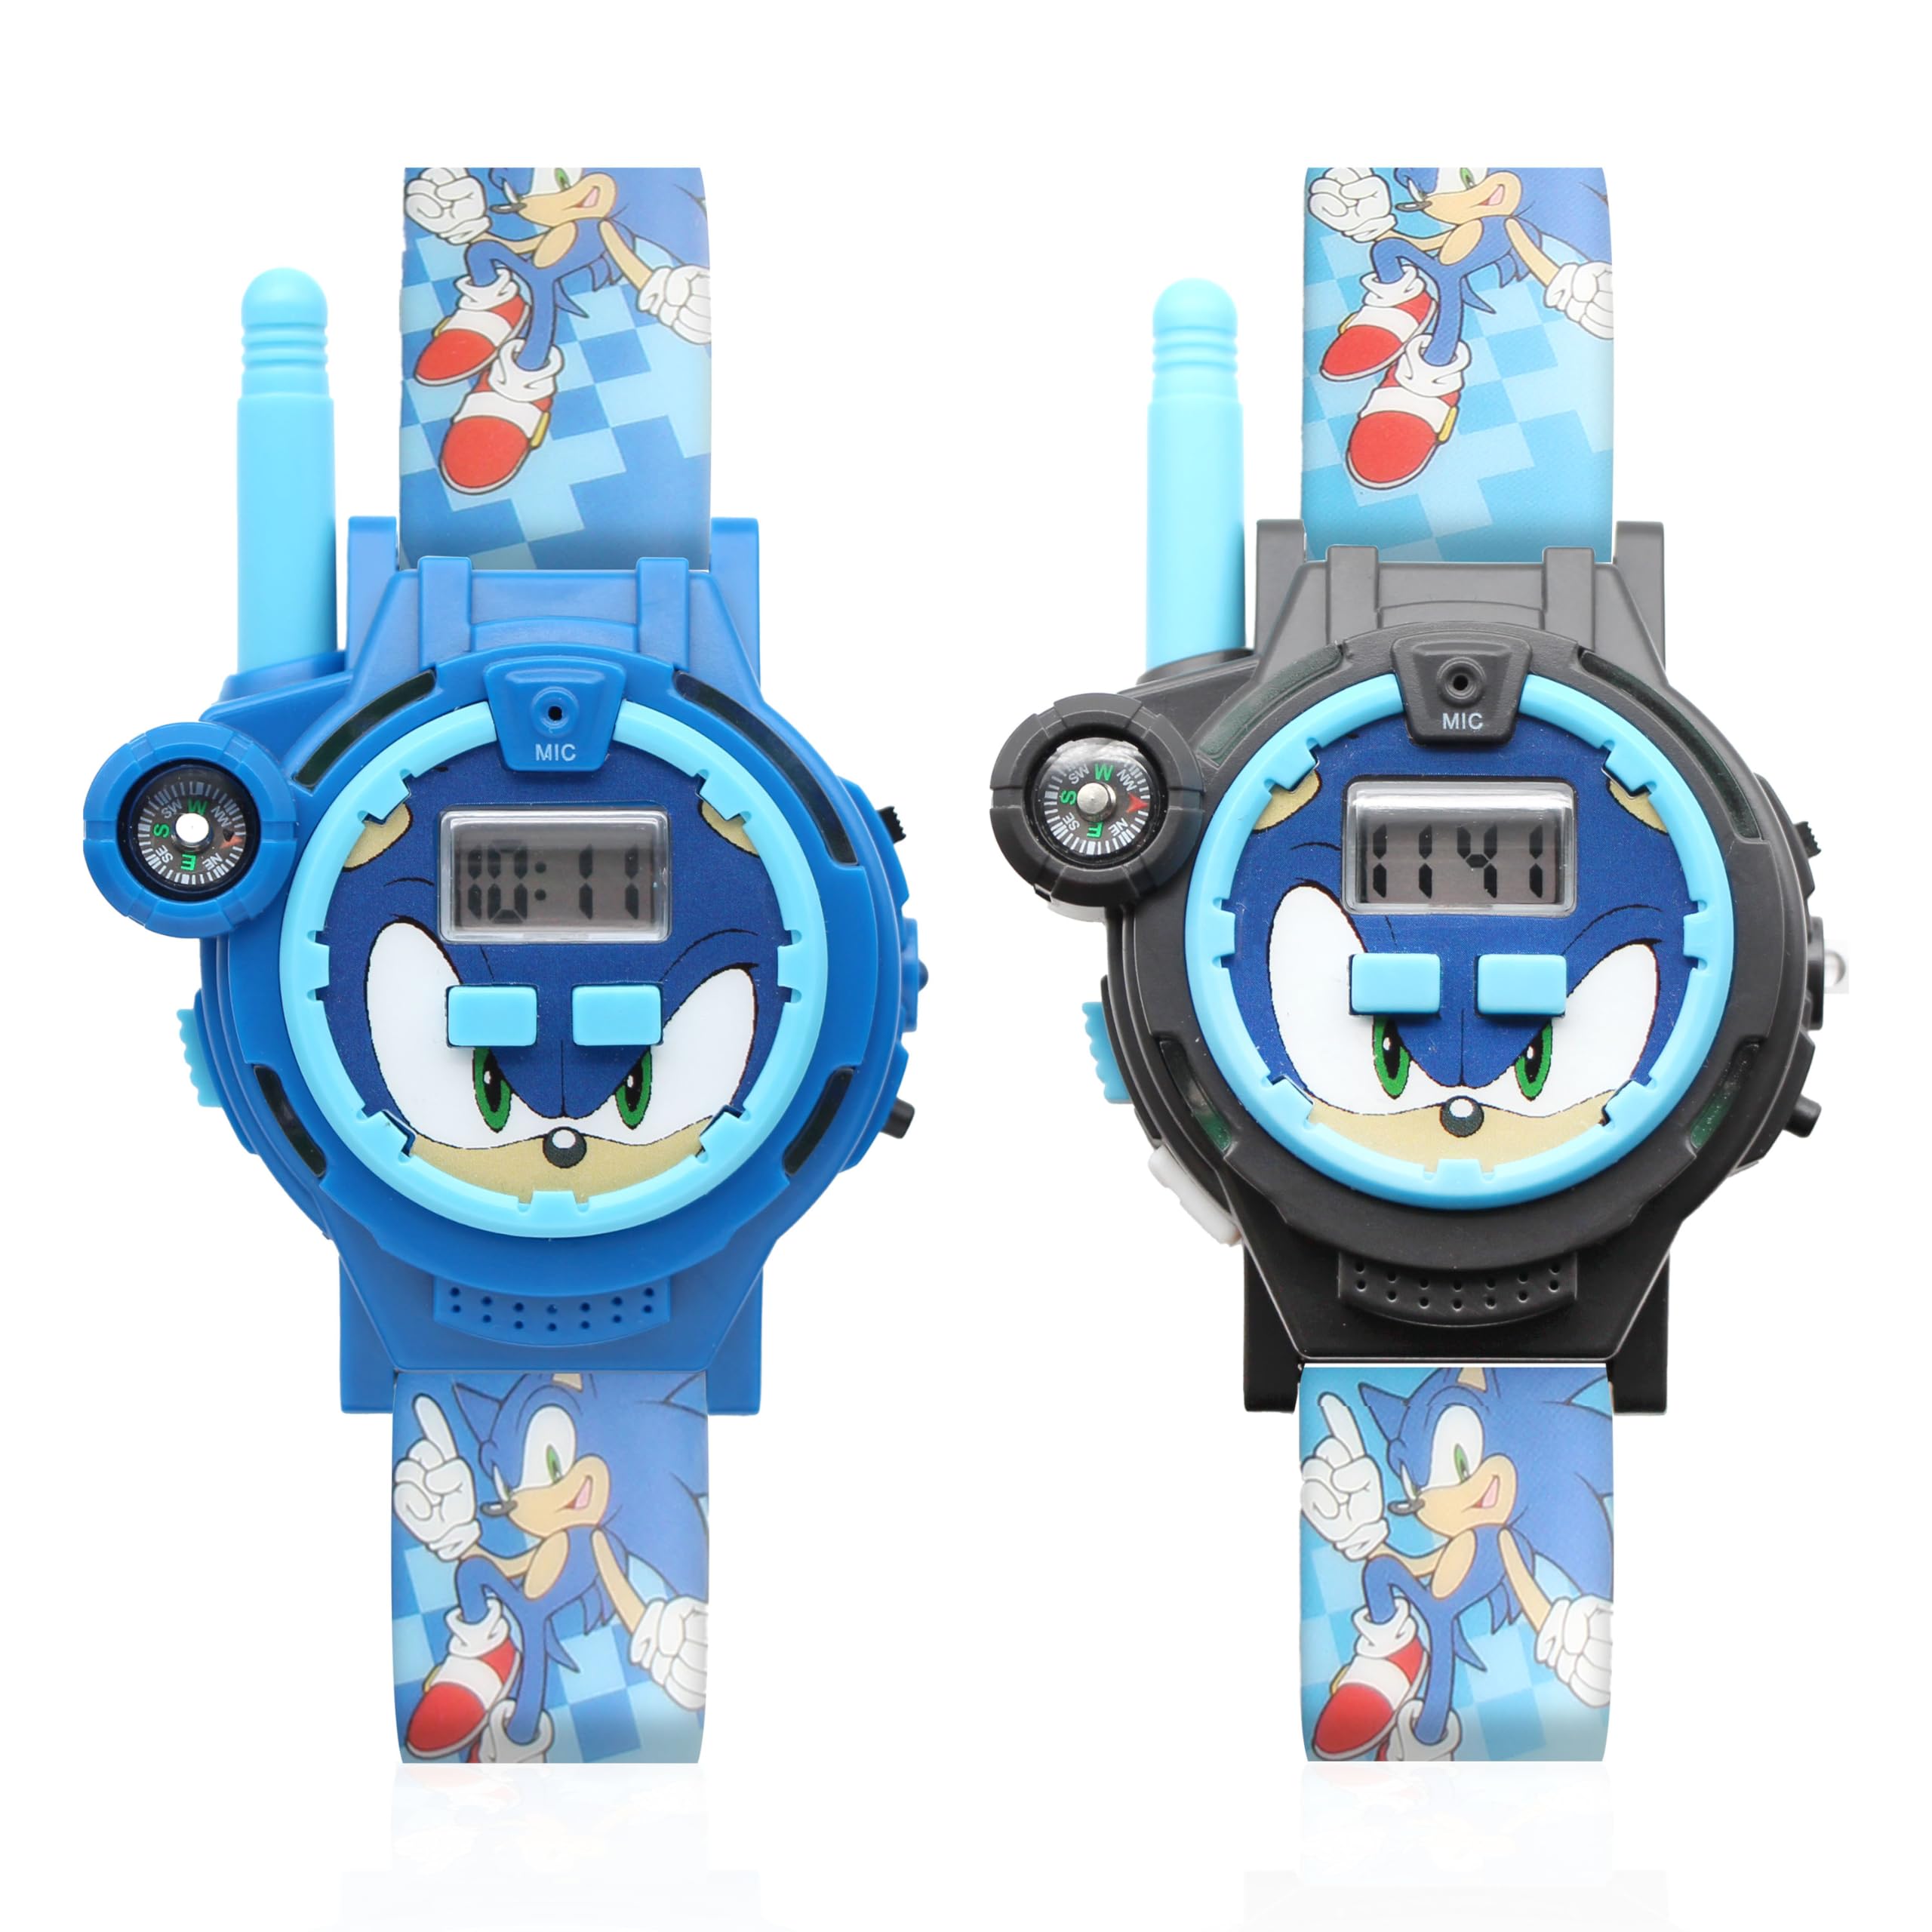 Accutime Sonic Walkie Talkie Blue Educational Digital Kids Watch Set of 2 -Toy with Multicolor Strap for Girls, Boys, Toddlers, 200 Meter Long Range Children's Watch (Model: SNC40094AZ)